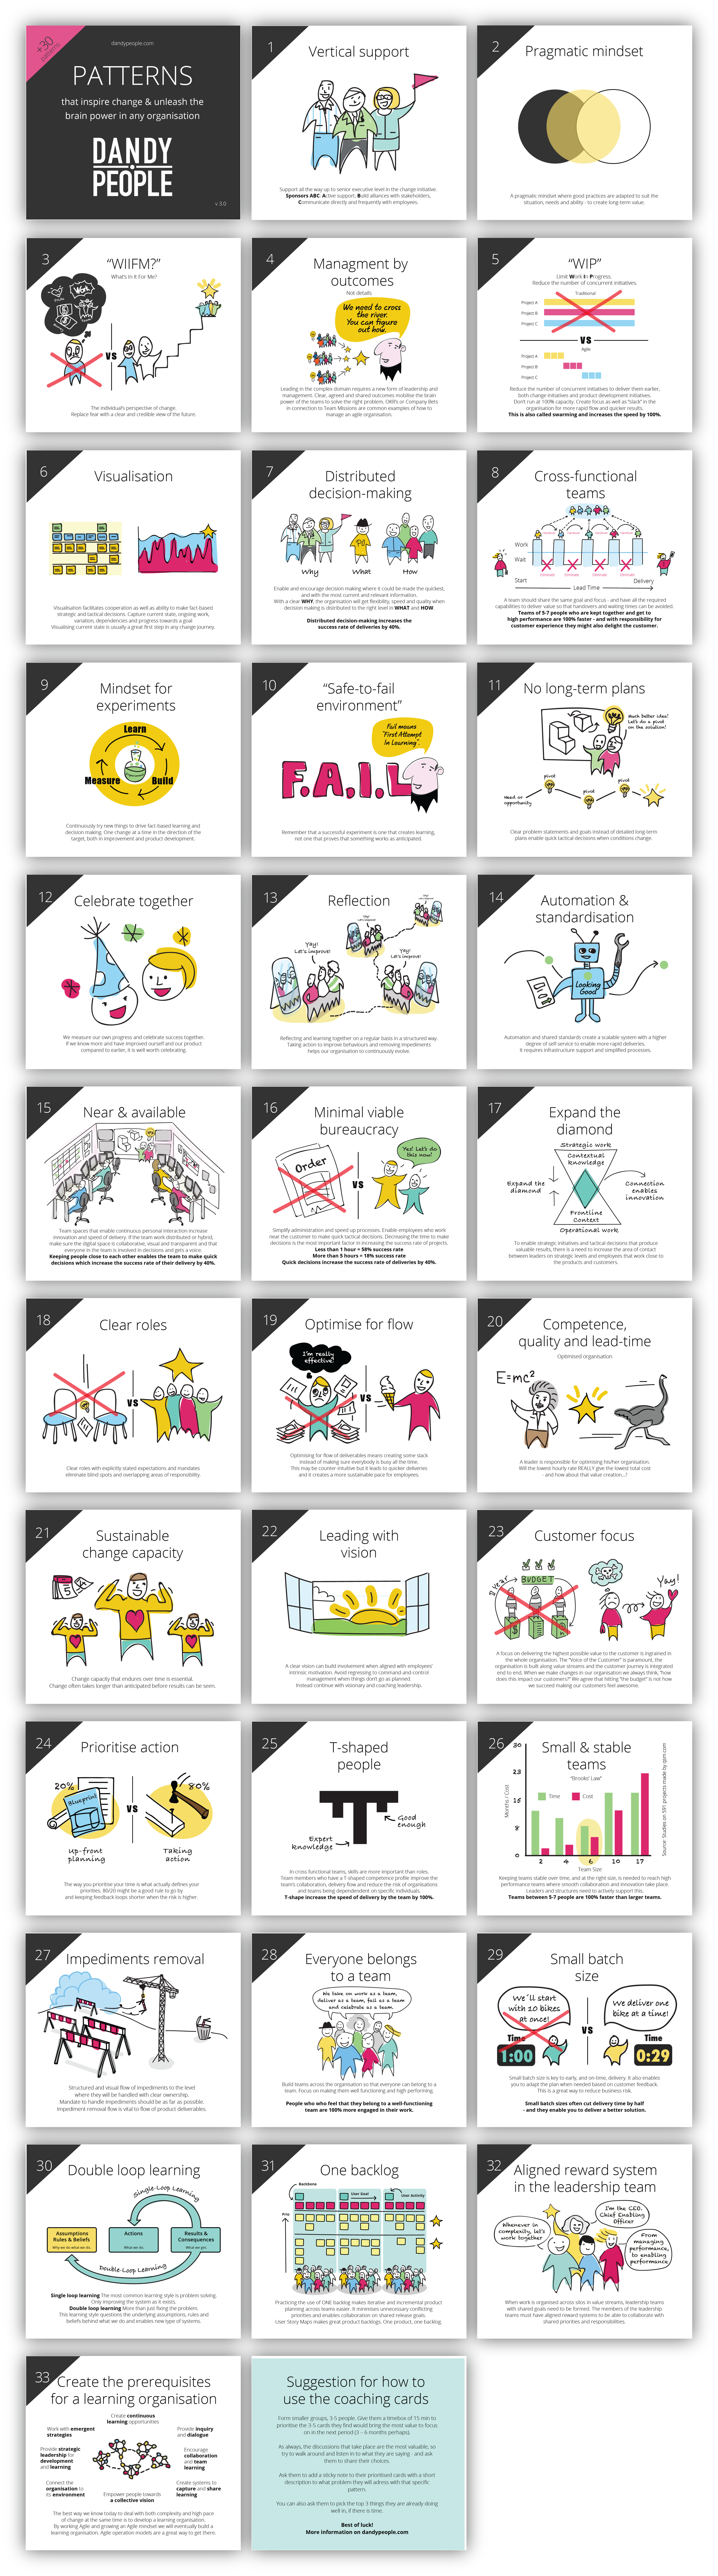 Pattern Cards for Agile Change